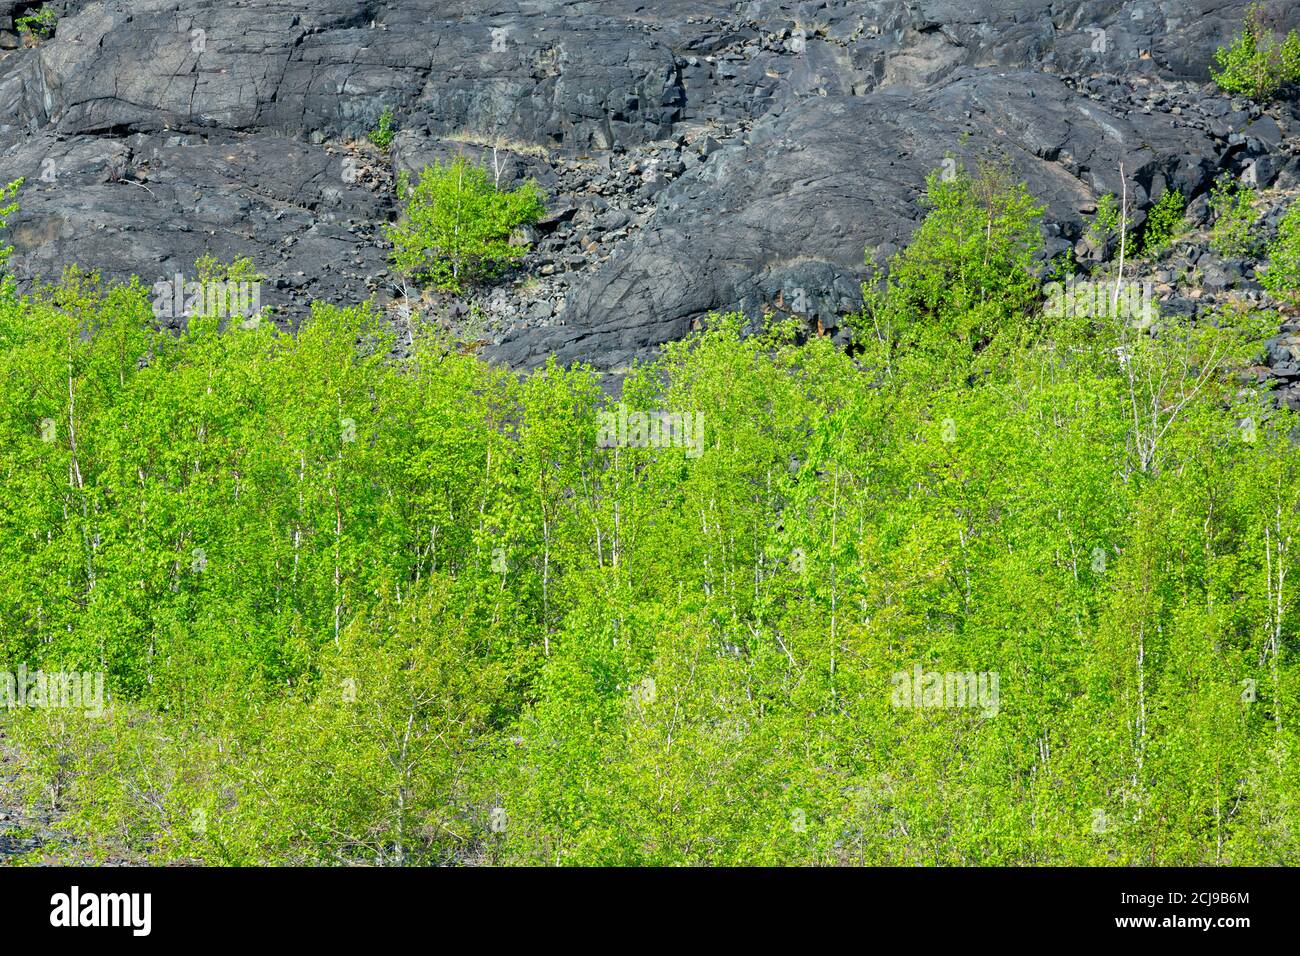 Springtime greenery of trees at base of black rocky hill, Copper Cliff (Sudbury), Ontario, Canada. Stock Photo